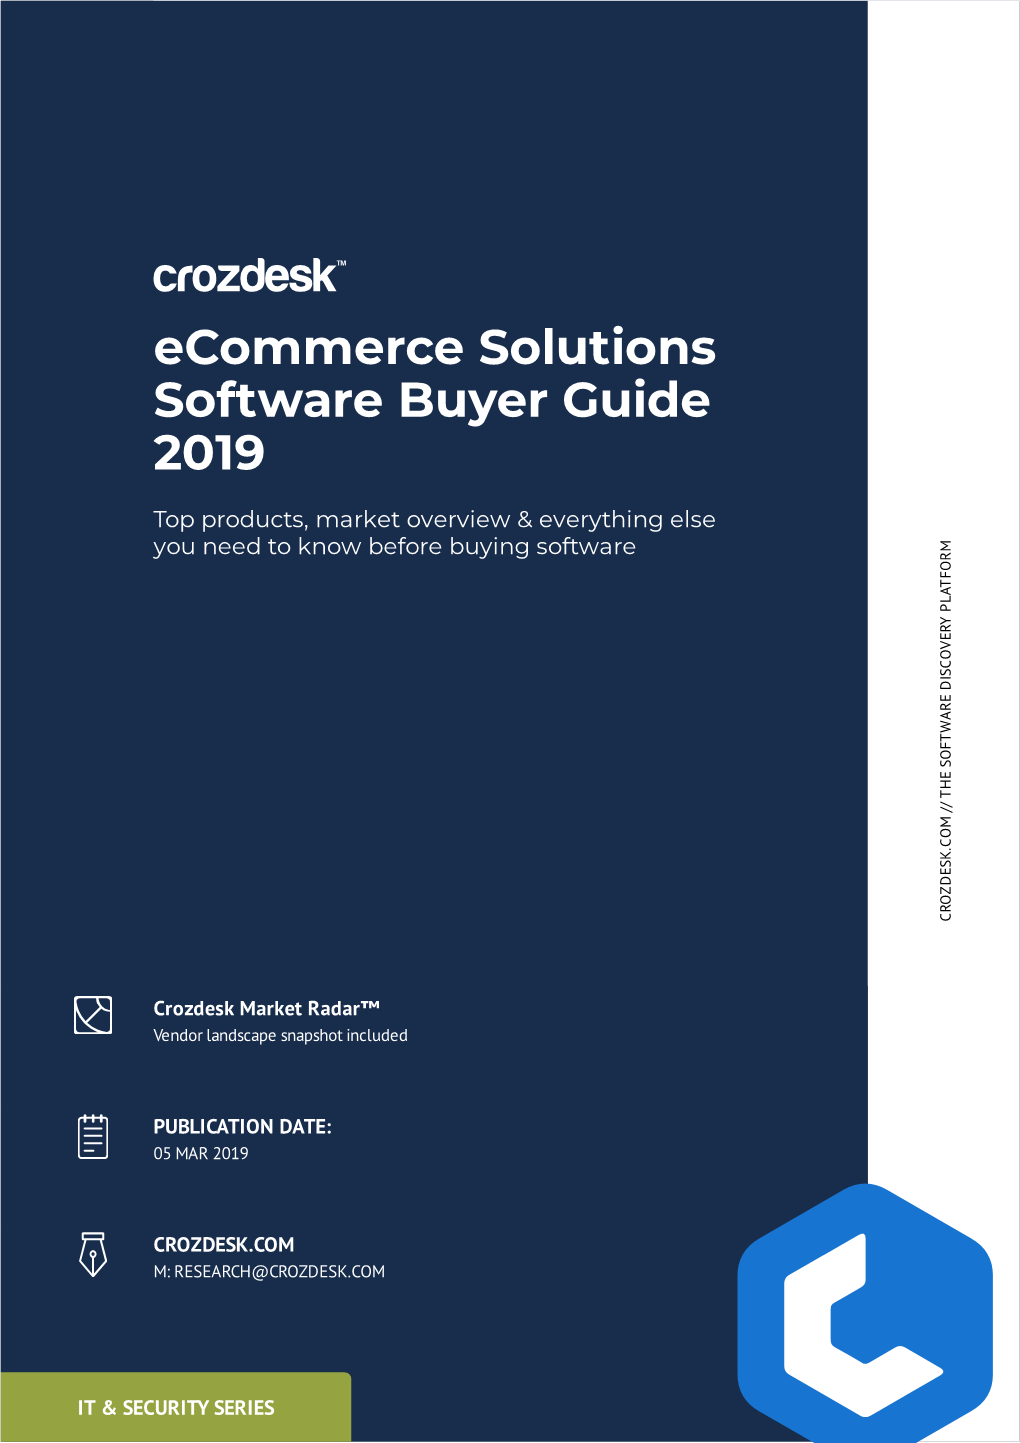 Ecommerce Solutions Software Buyer Guide 2019